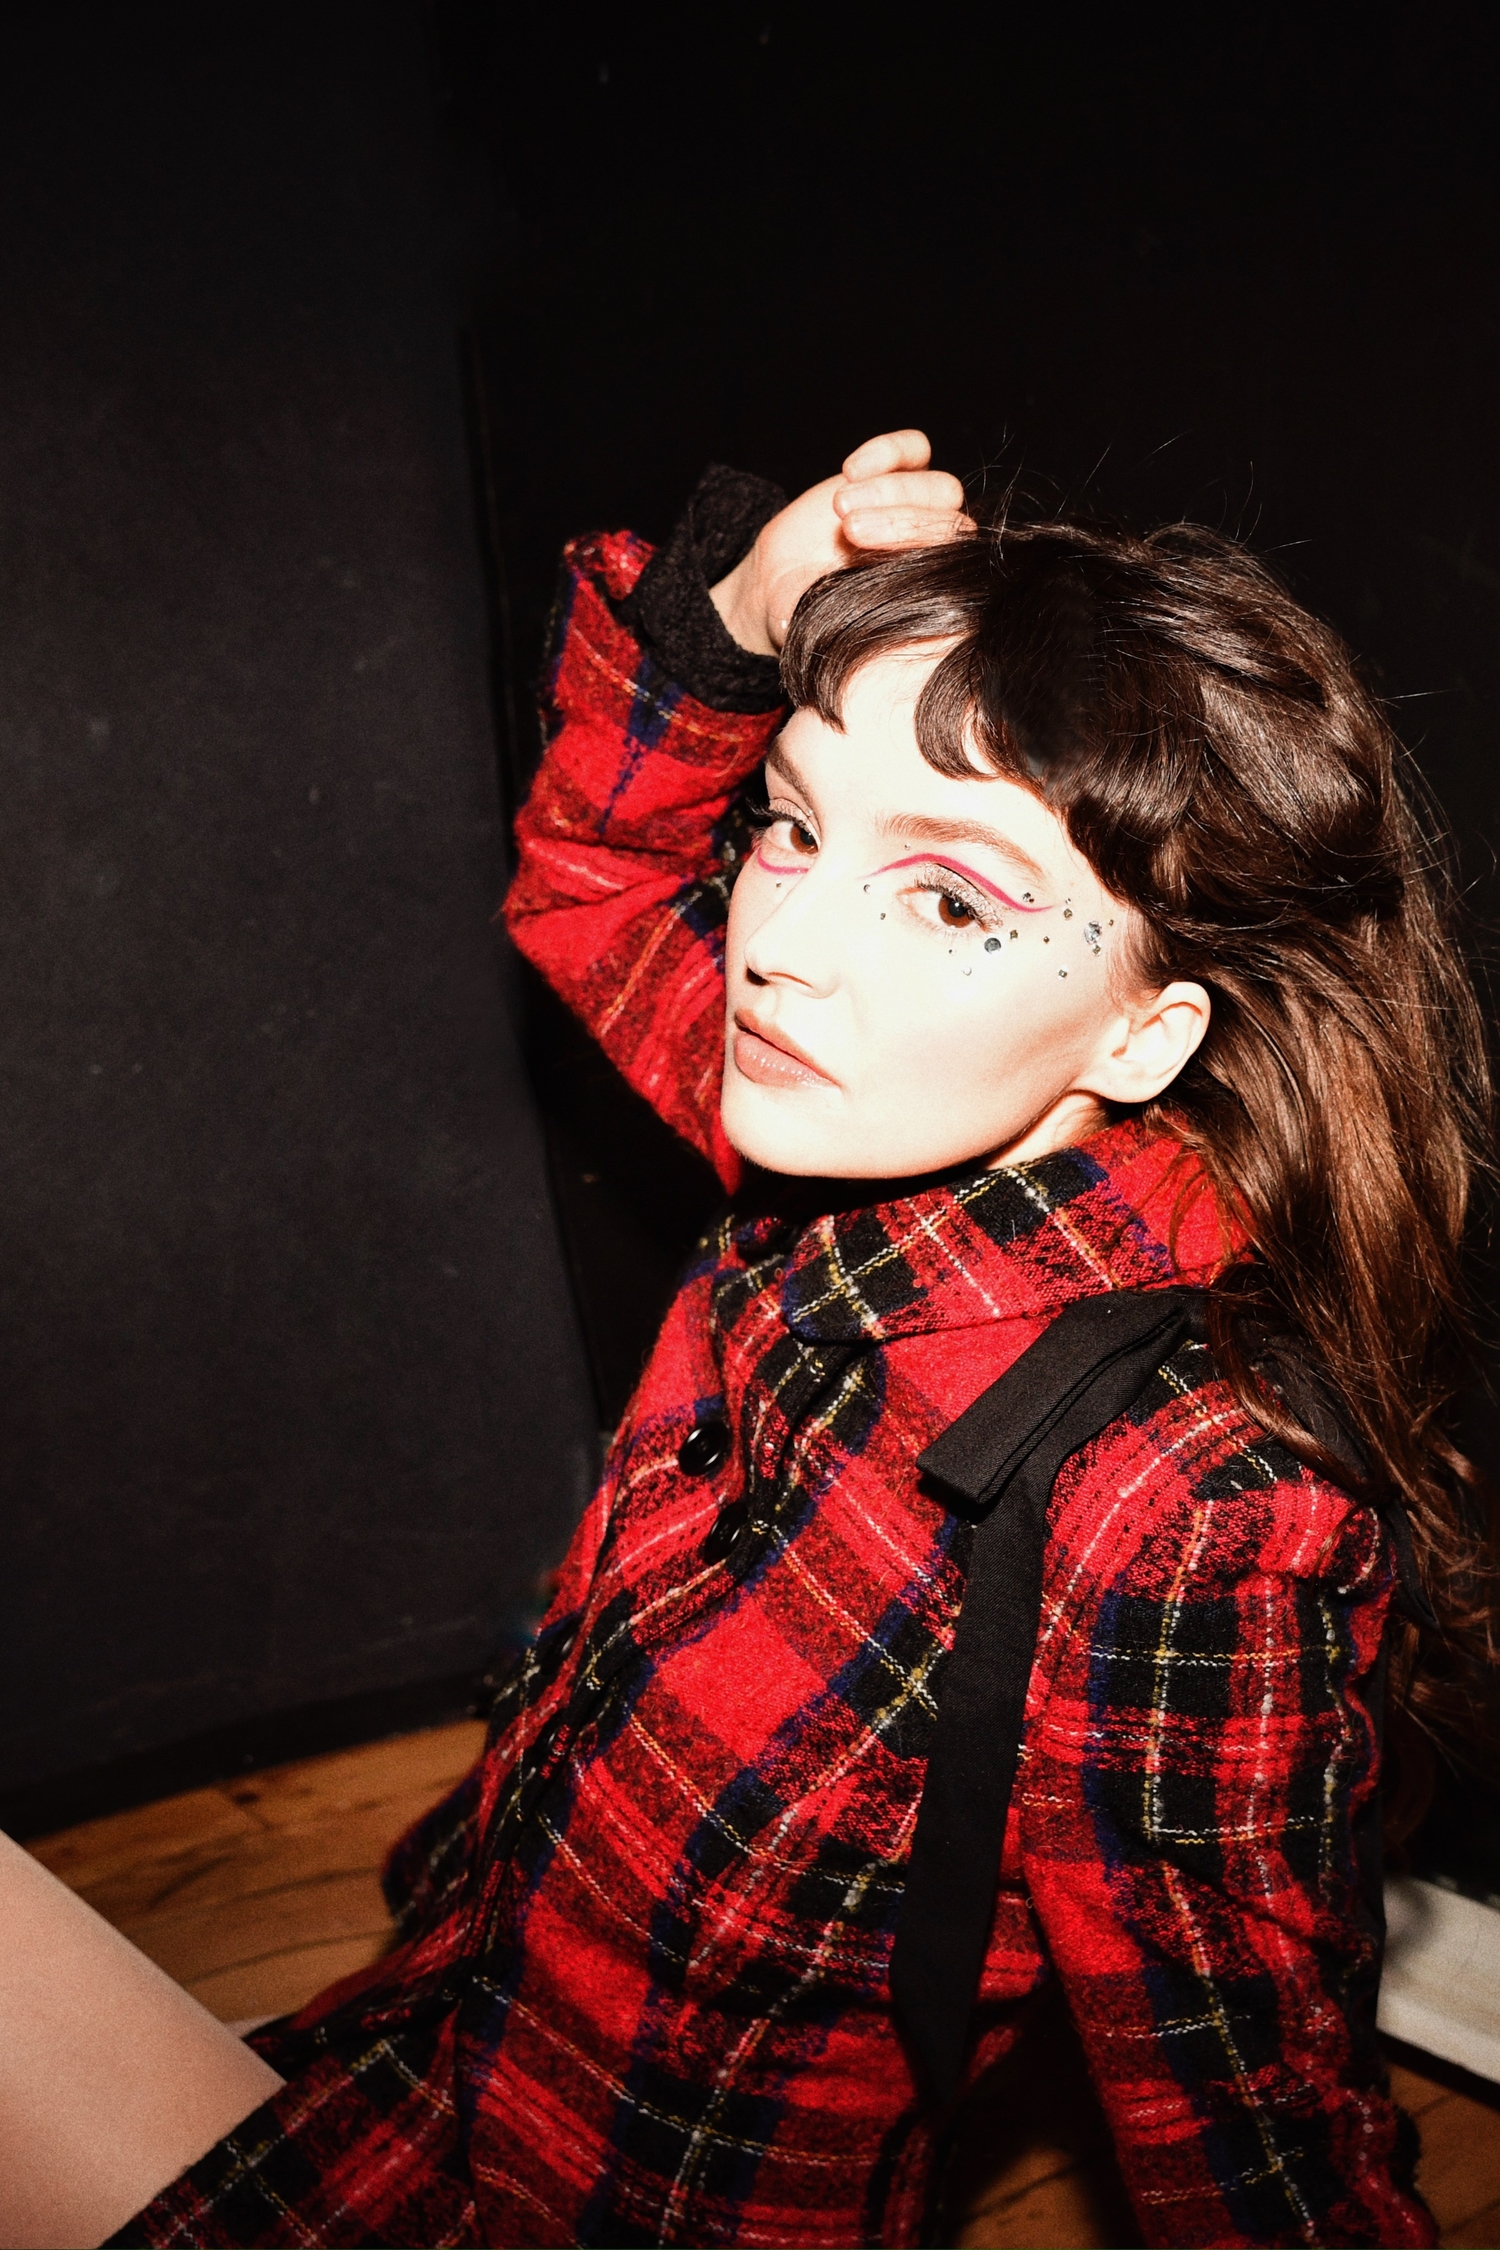 Lauren Mayberry on femininity, CHVRCHES, and her iconic new solo era